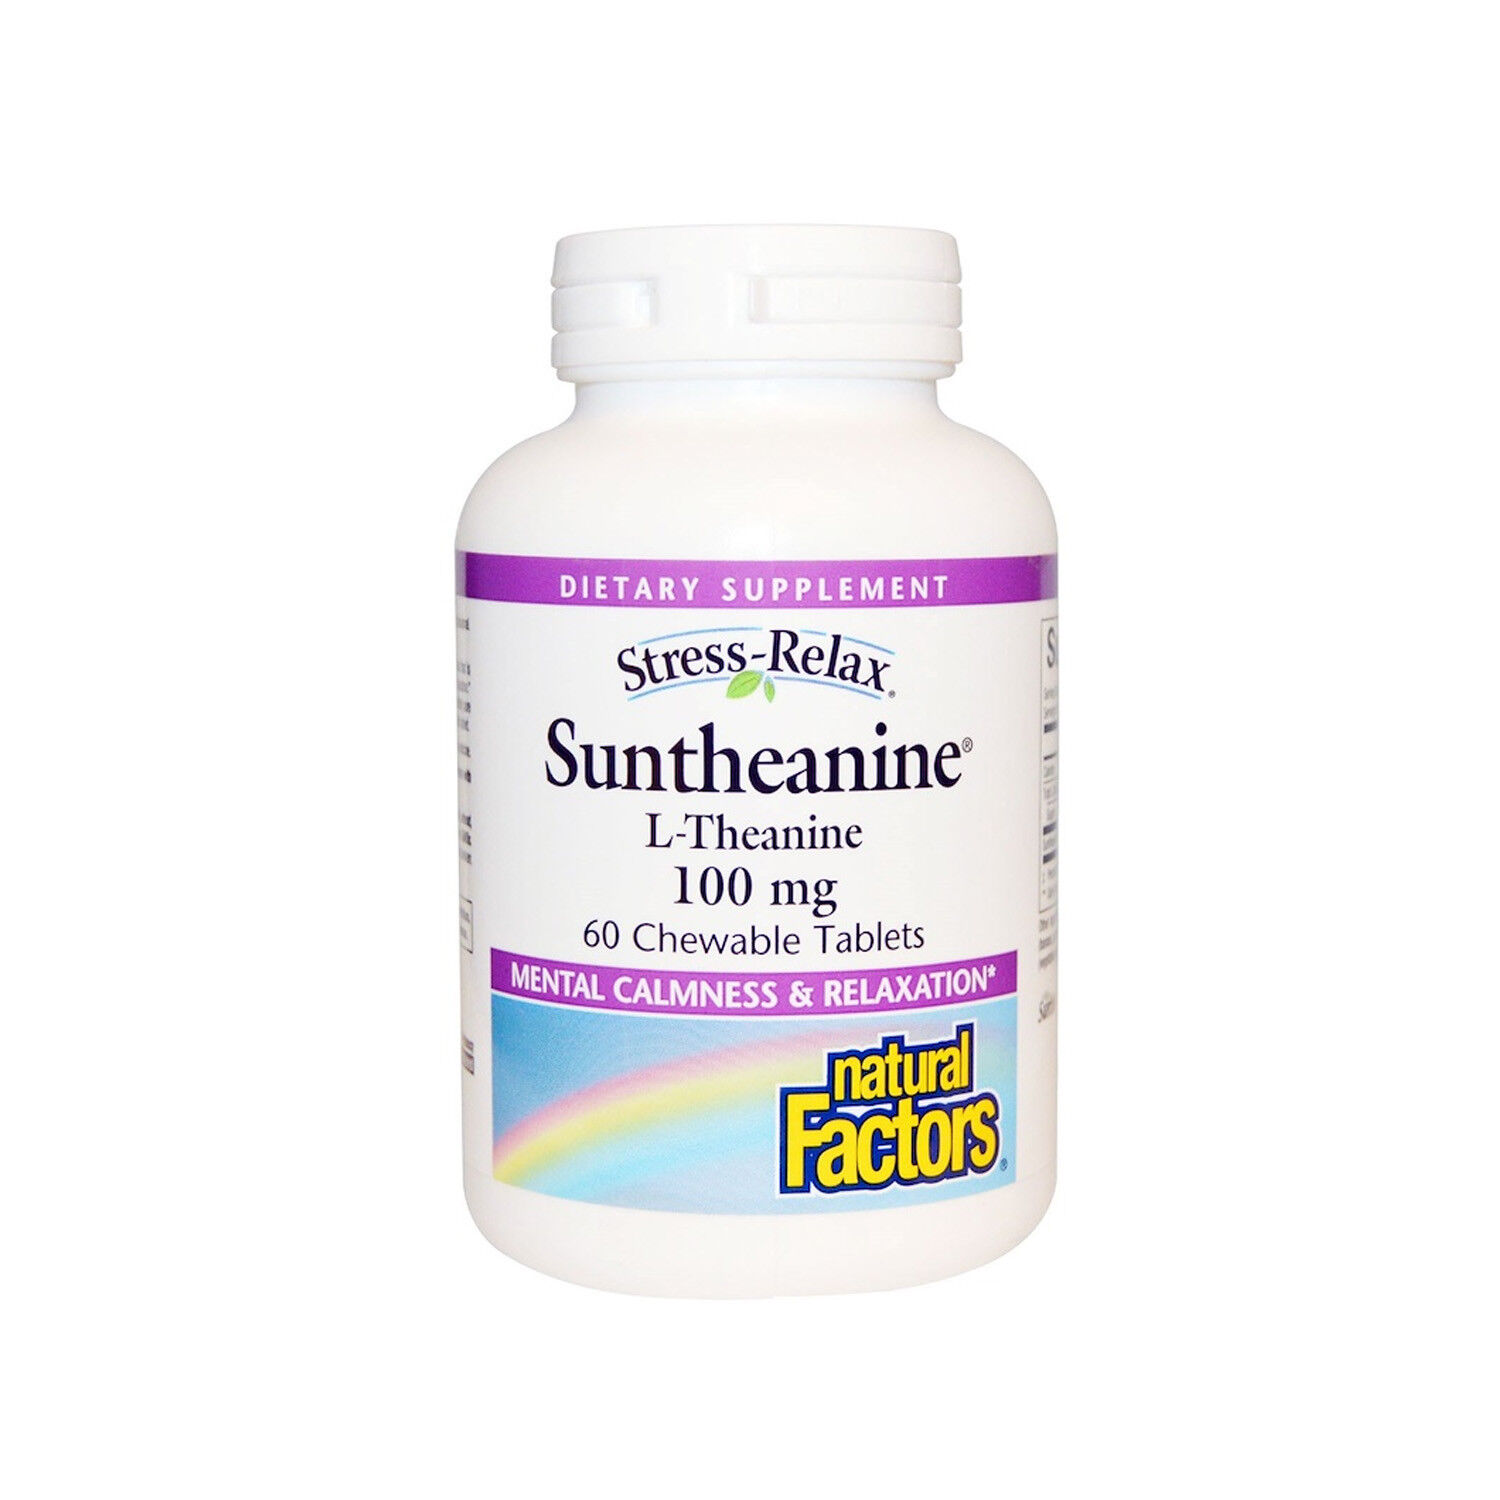 Natural Factors Stress-Relax Suntheanine L-Theanine, 60 Chewable Tablets